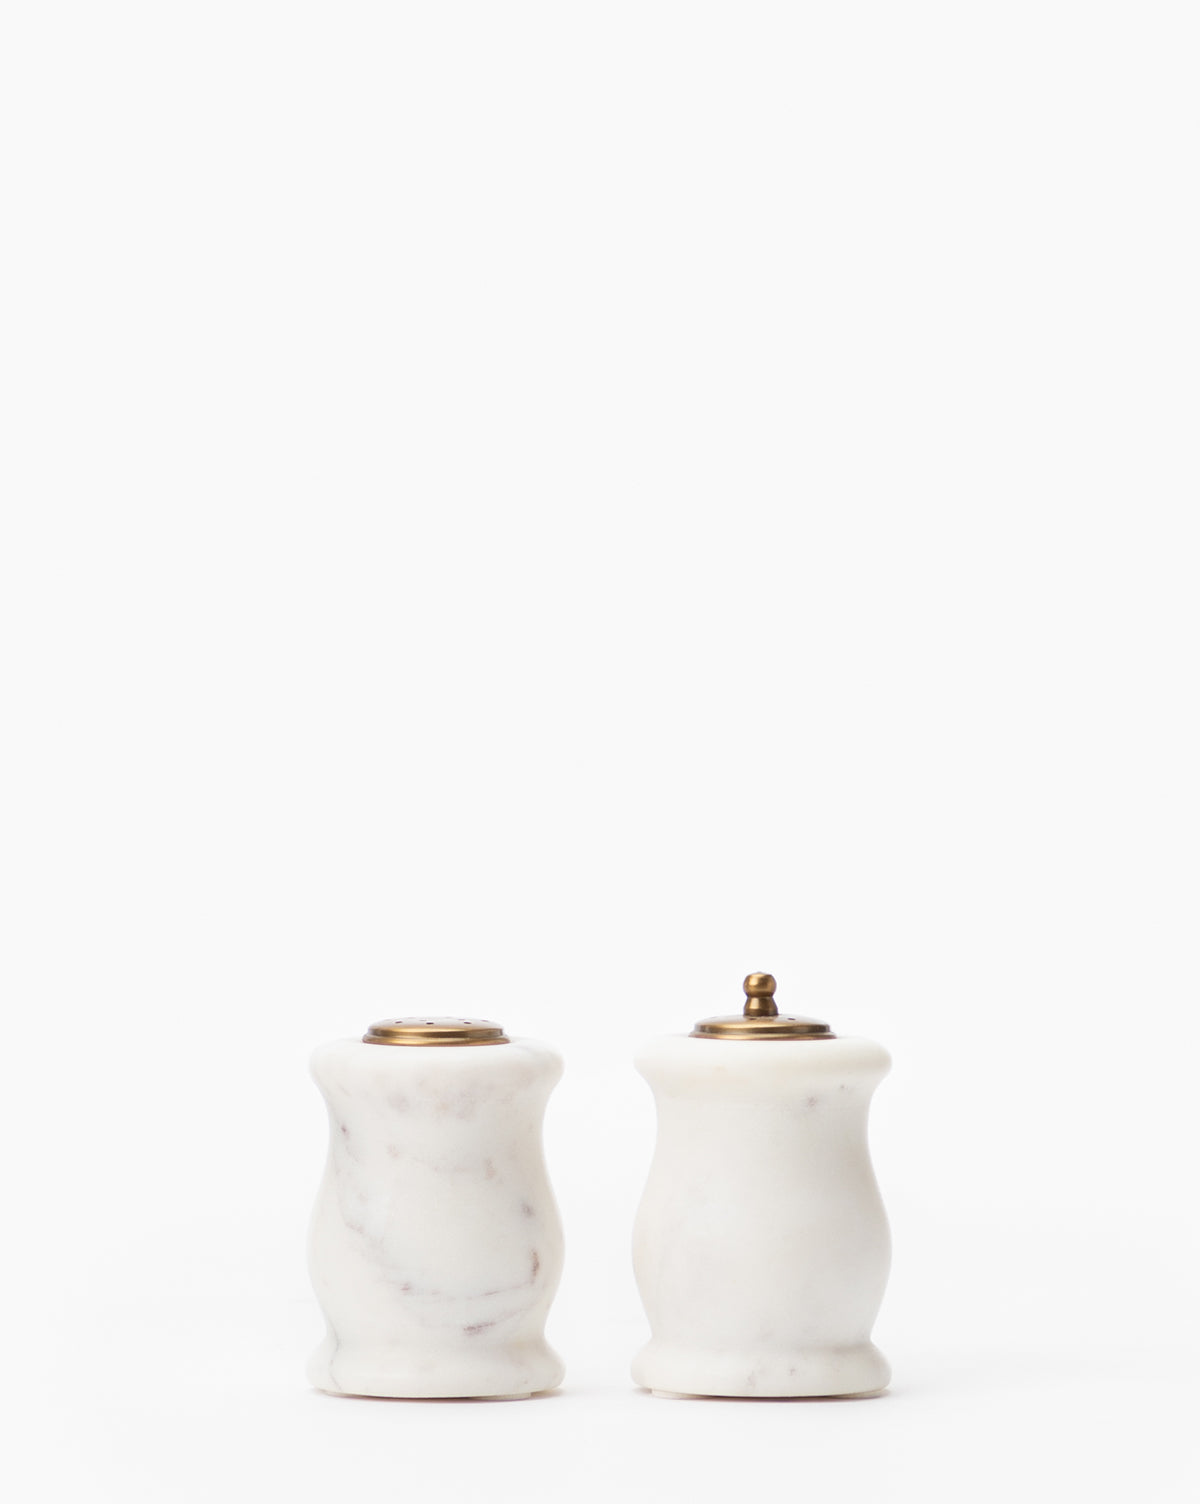 Be Home, Marble Salt & Pepper Shakers (Set of 2)